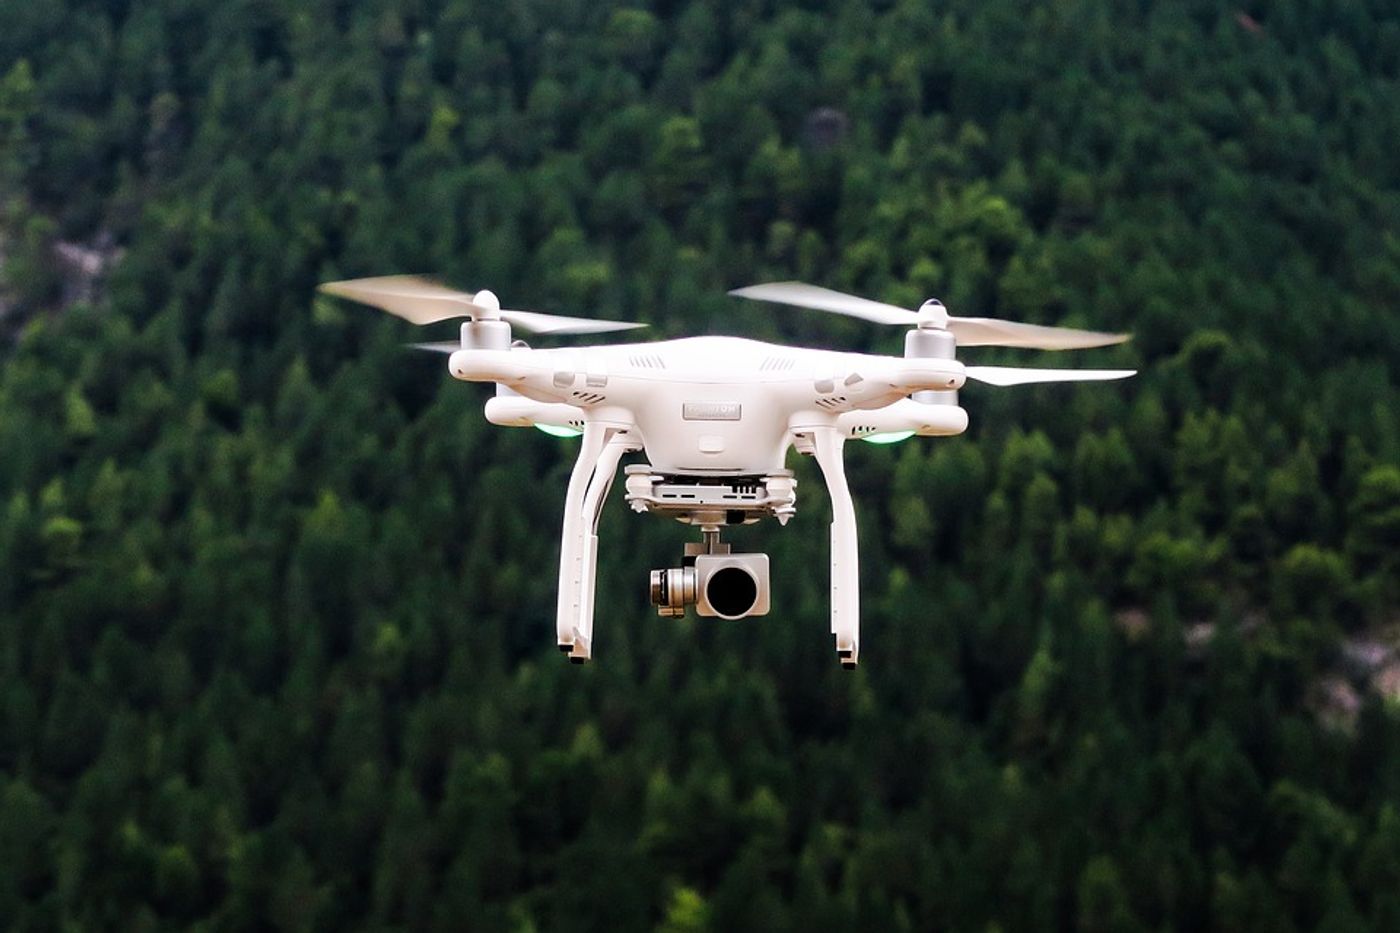 Can animals become accustomed to drones buzzing around their habitats?